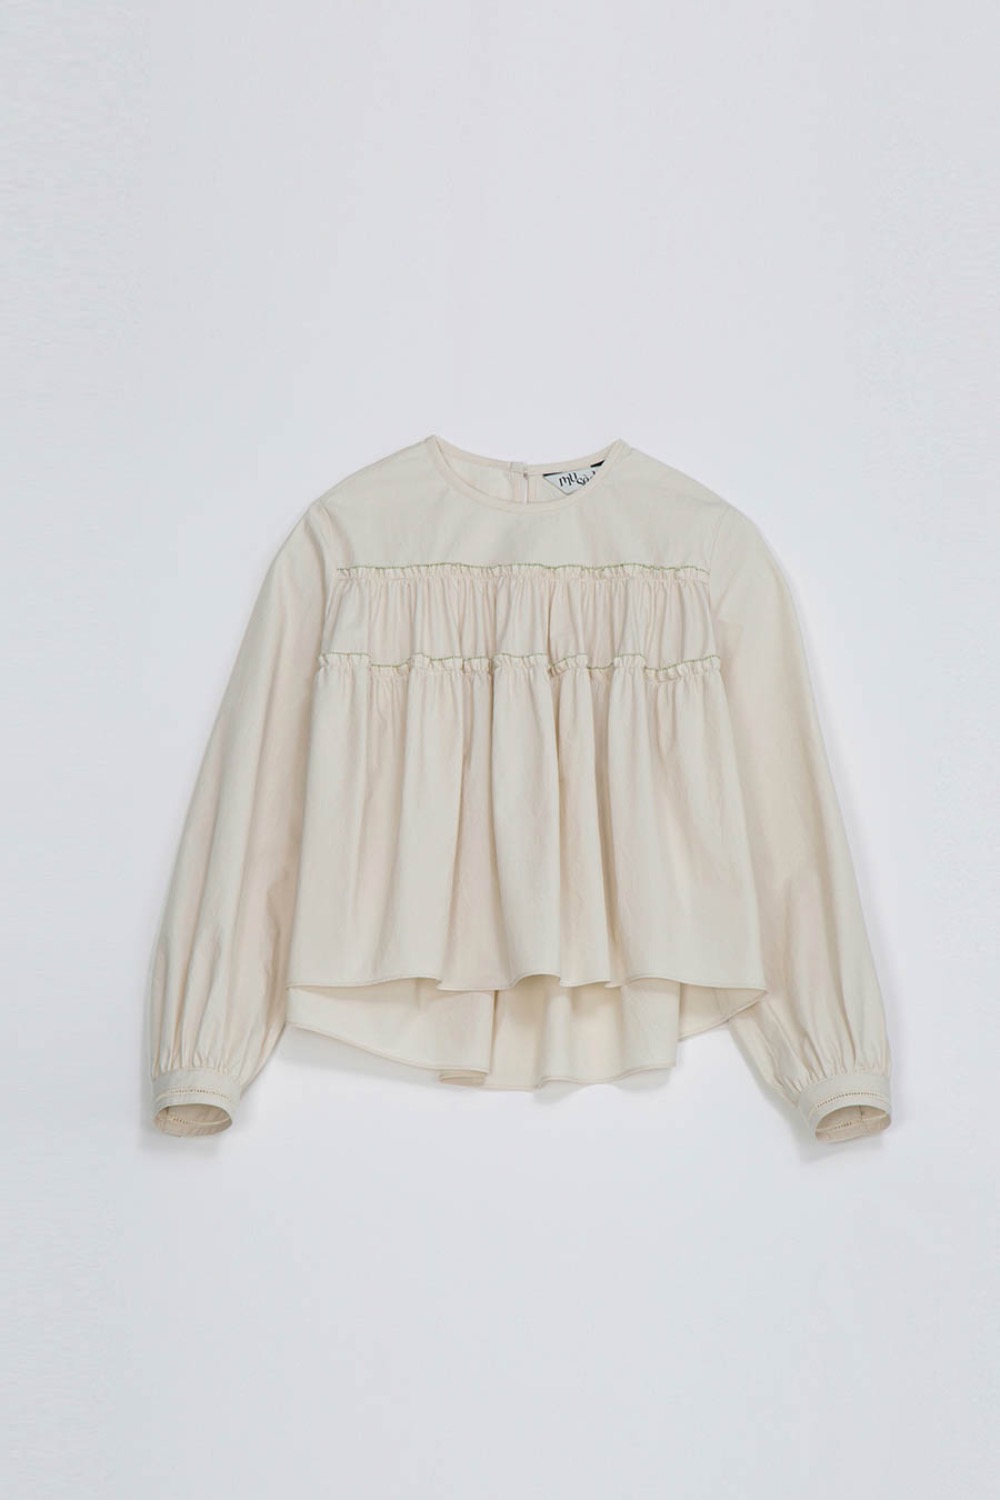 AGREABLE TIERD BLOUSE -IVORY COTTON